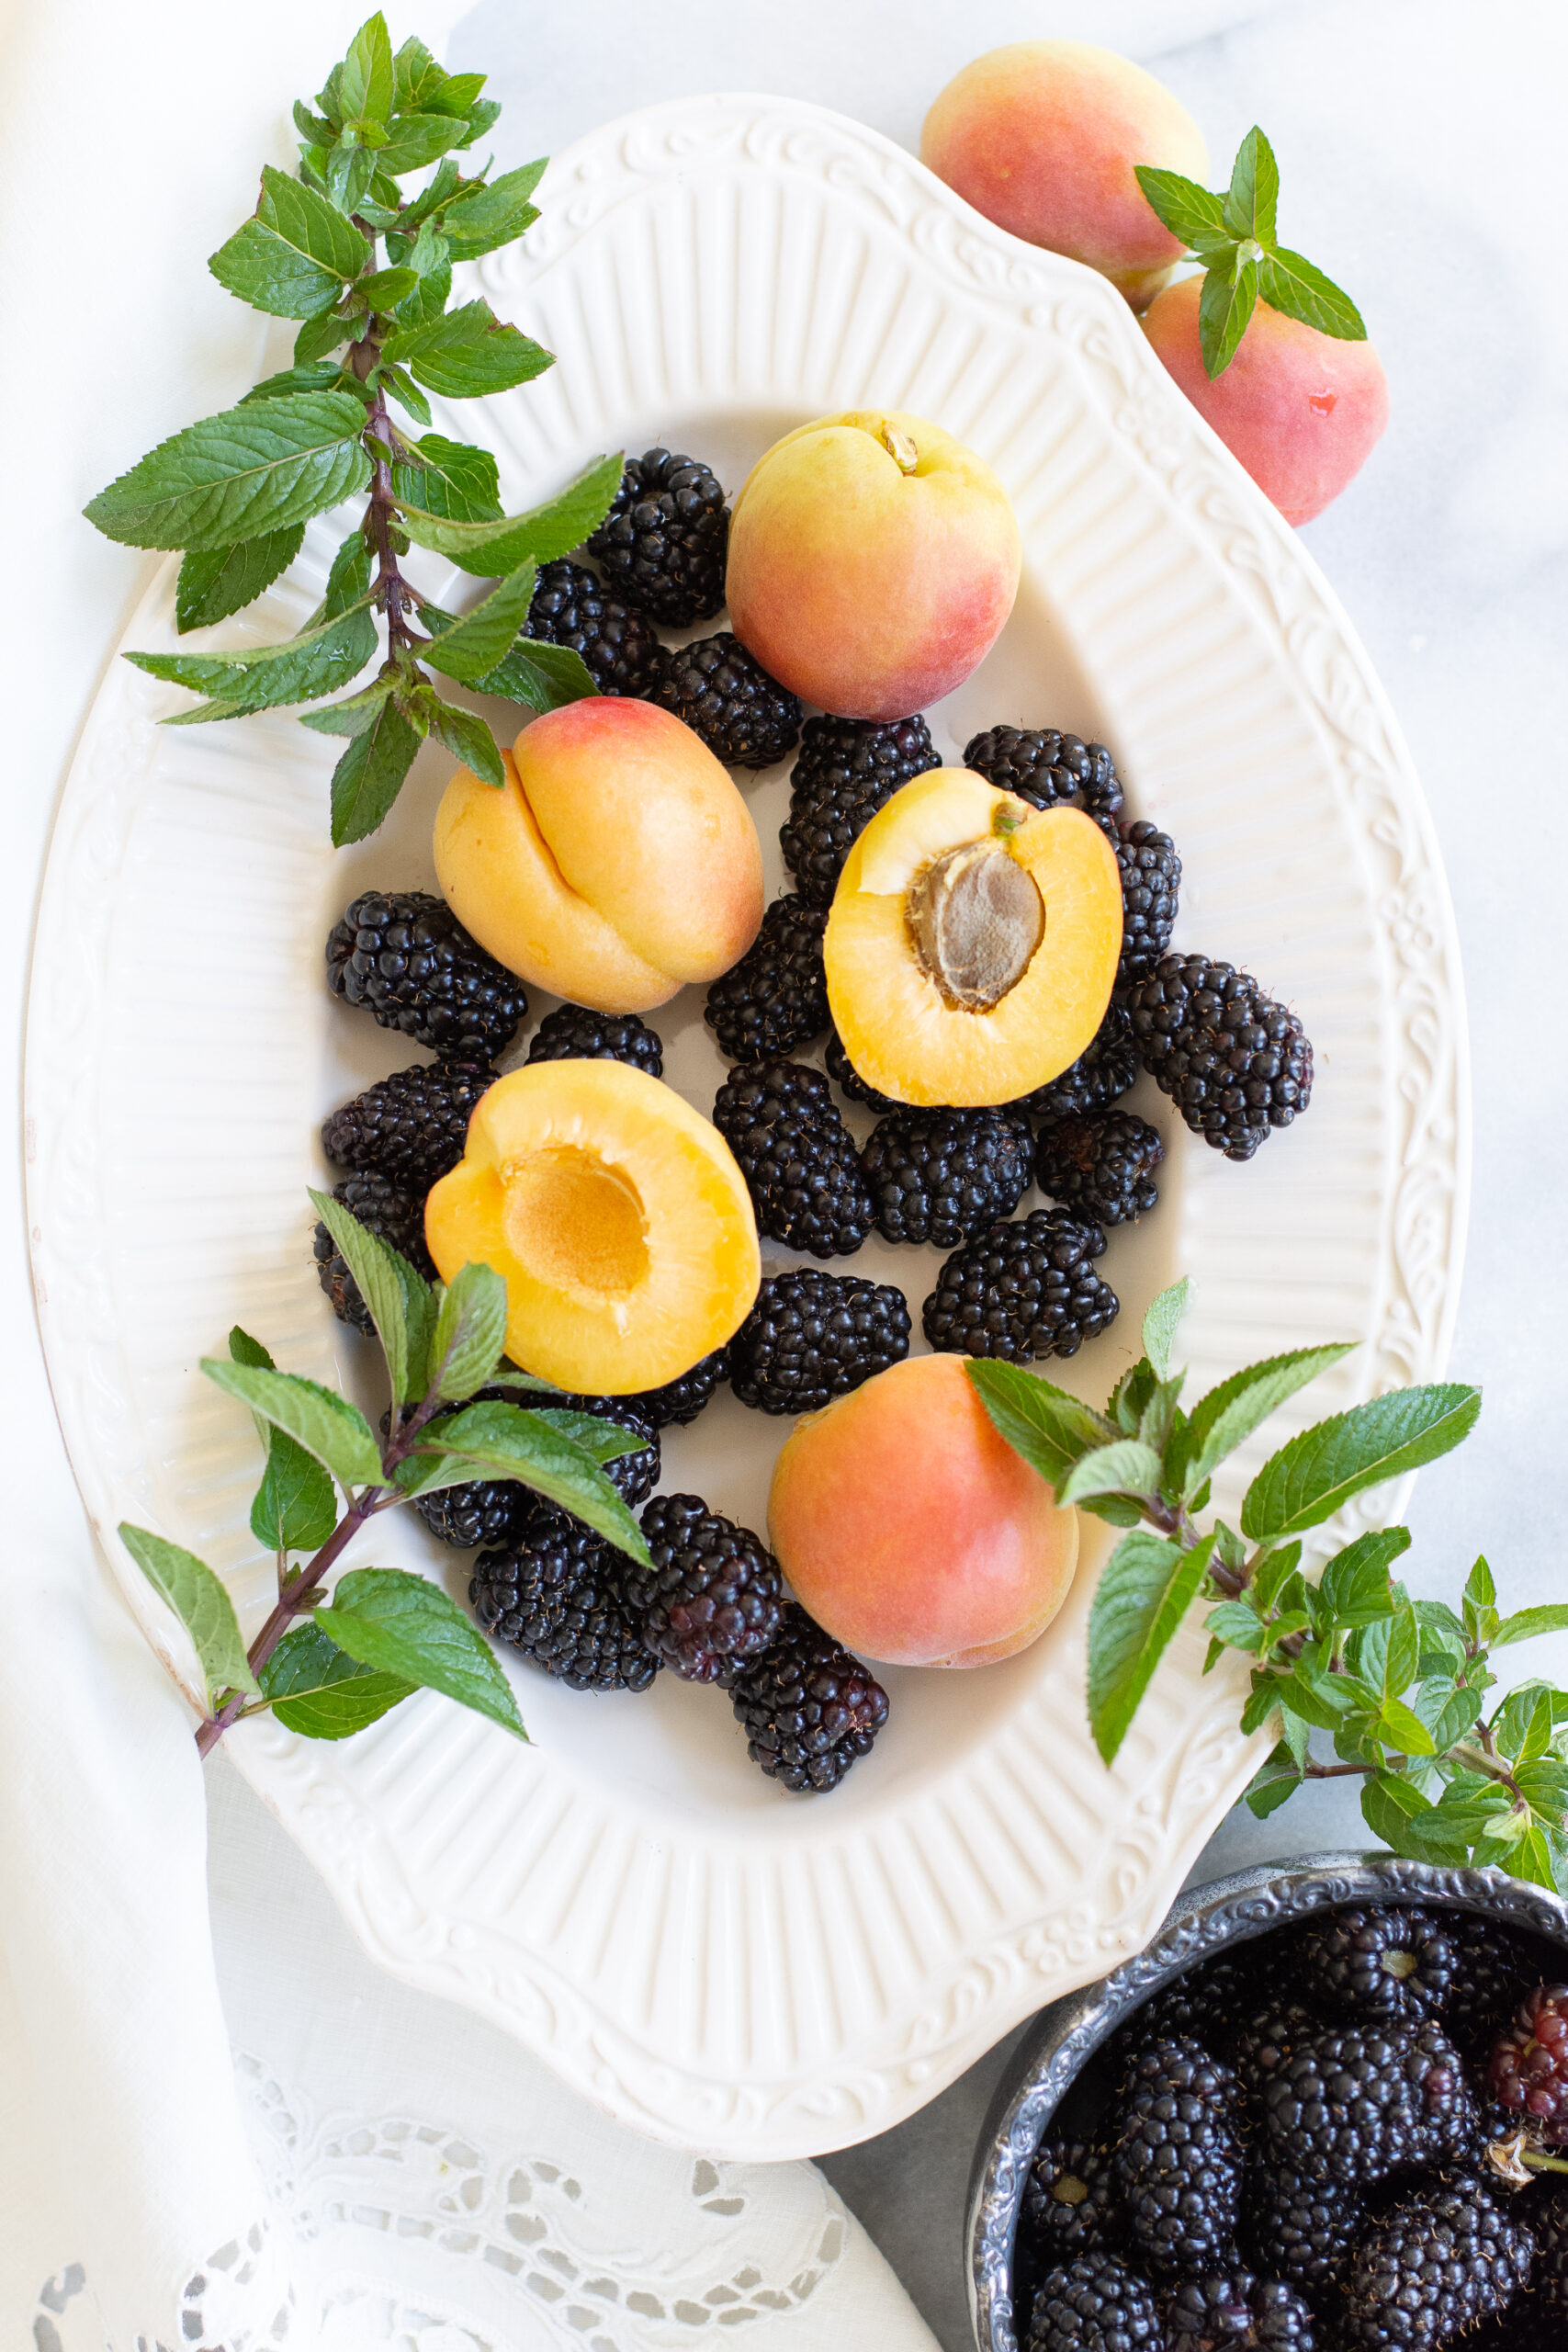 https://theprudenthomemaker.com/wp-content/uploads/2022/05/Blackberries-and-Apricots-in-May-2-The-Prudent-Homemaker-scaled.jpg